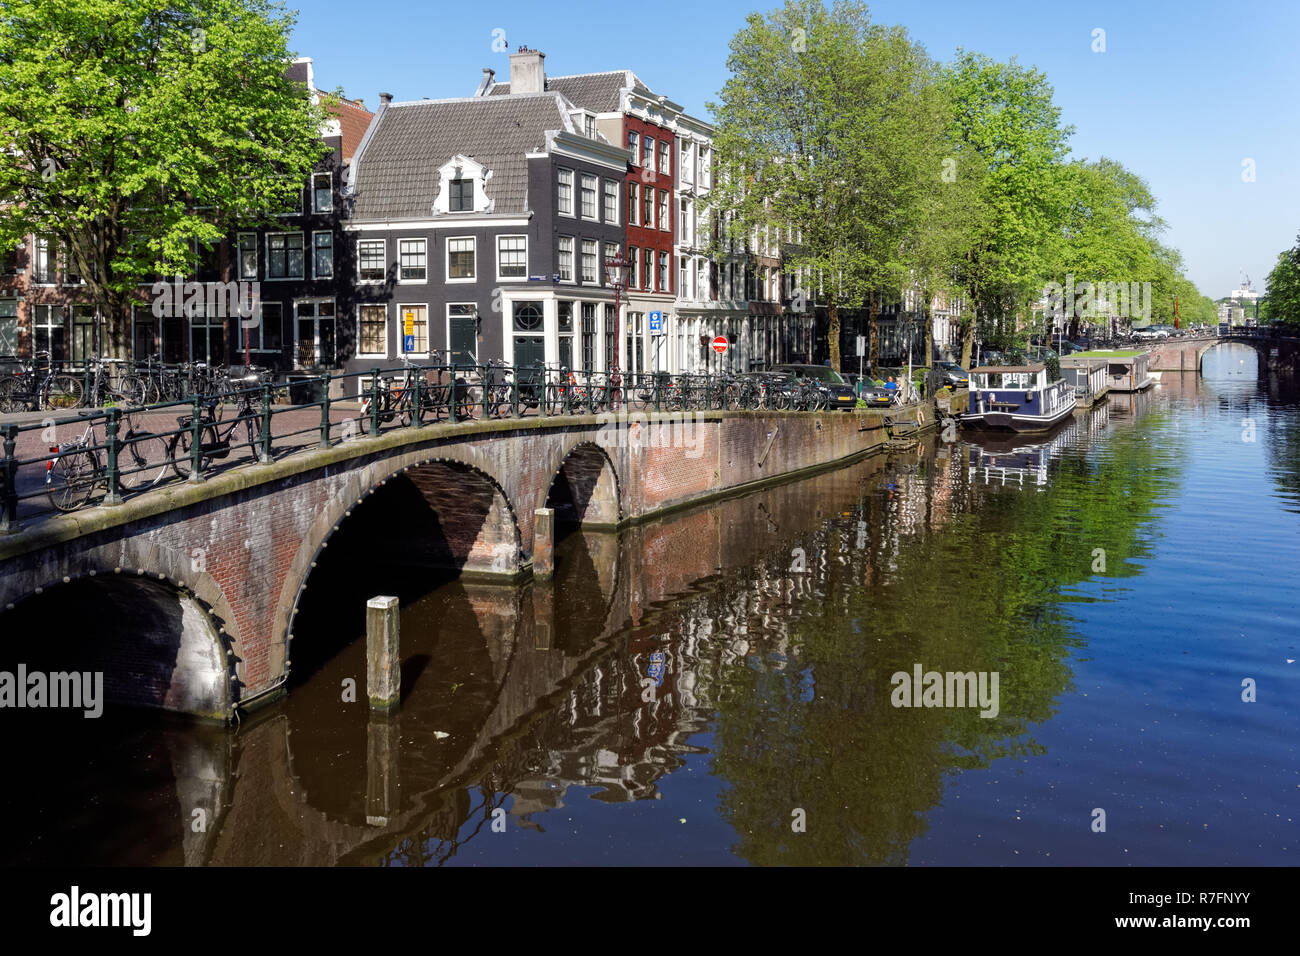 The Keizersgracht canal in Amsterdam, Netherlands Stock Photo